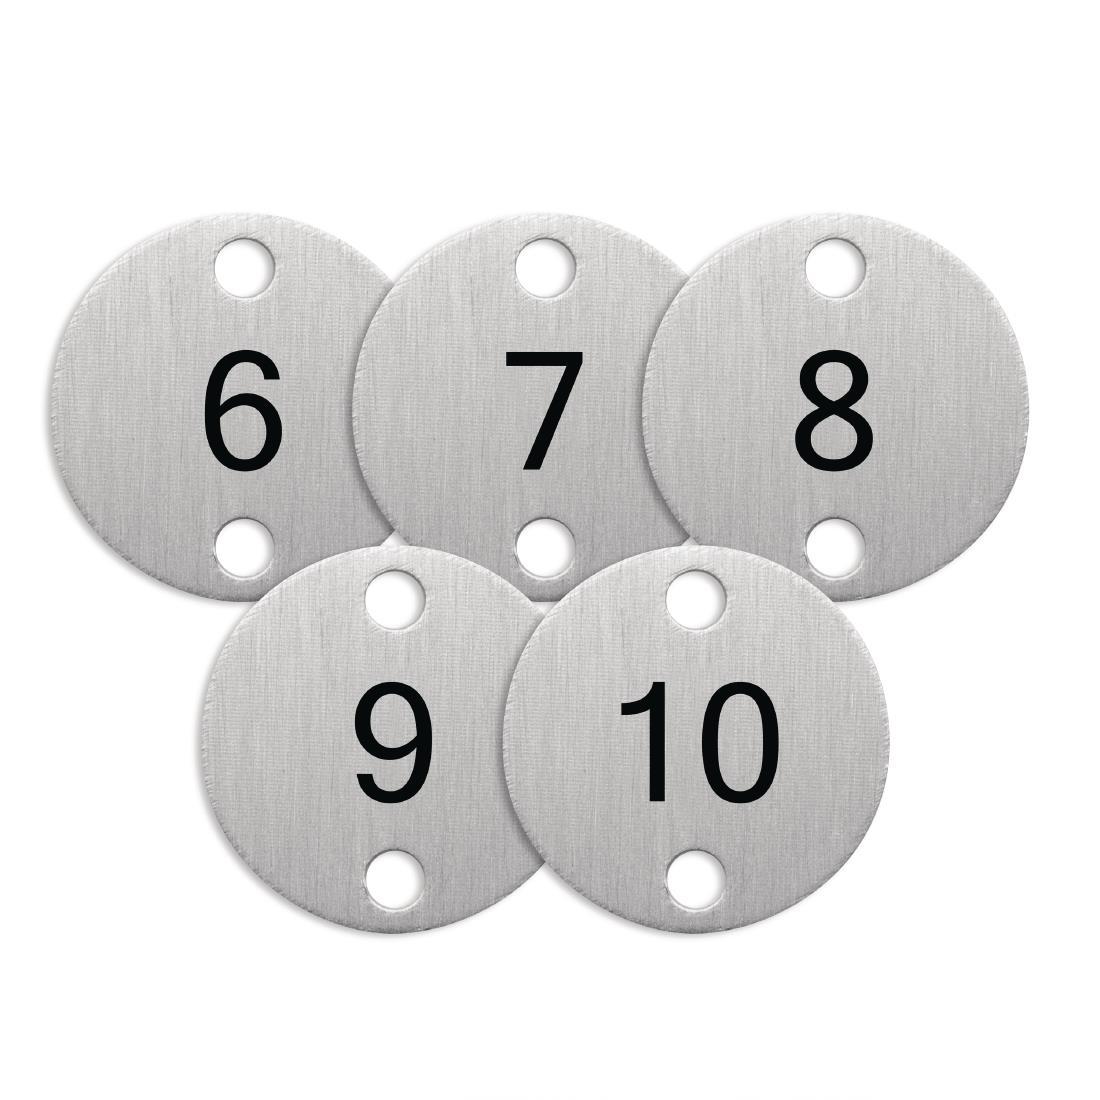 Bolero Table Numbers Silver (6-10) - DY771  - 3